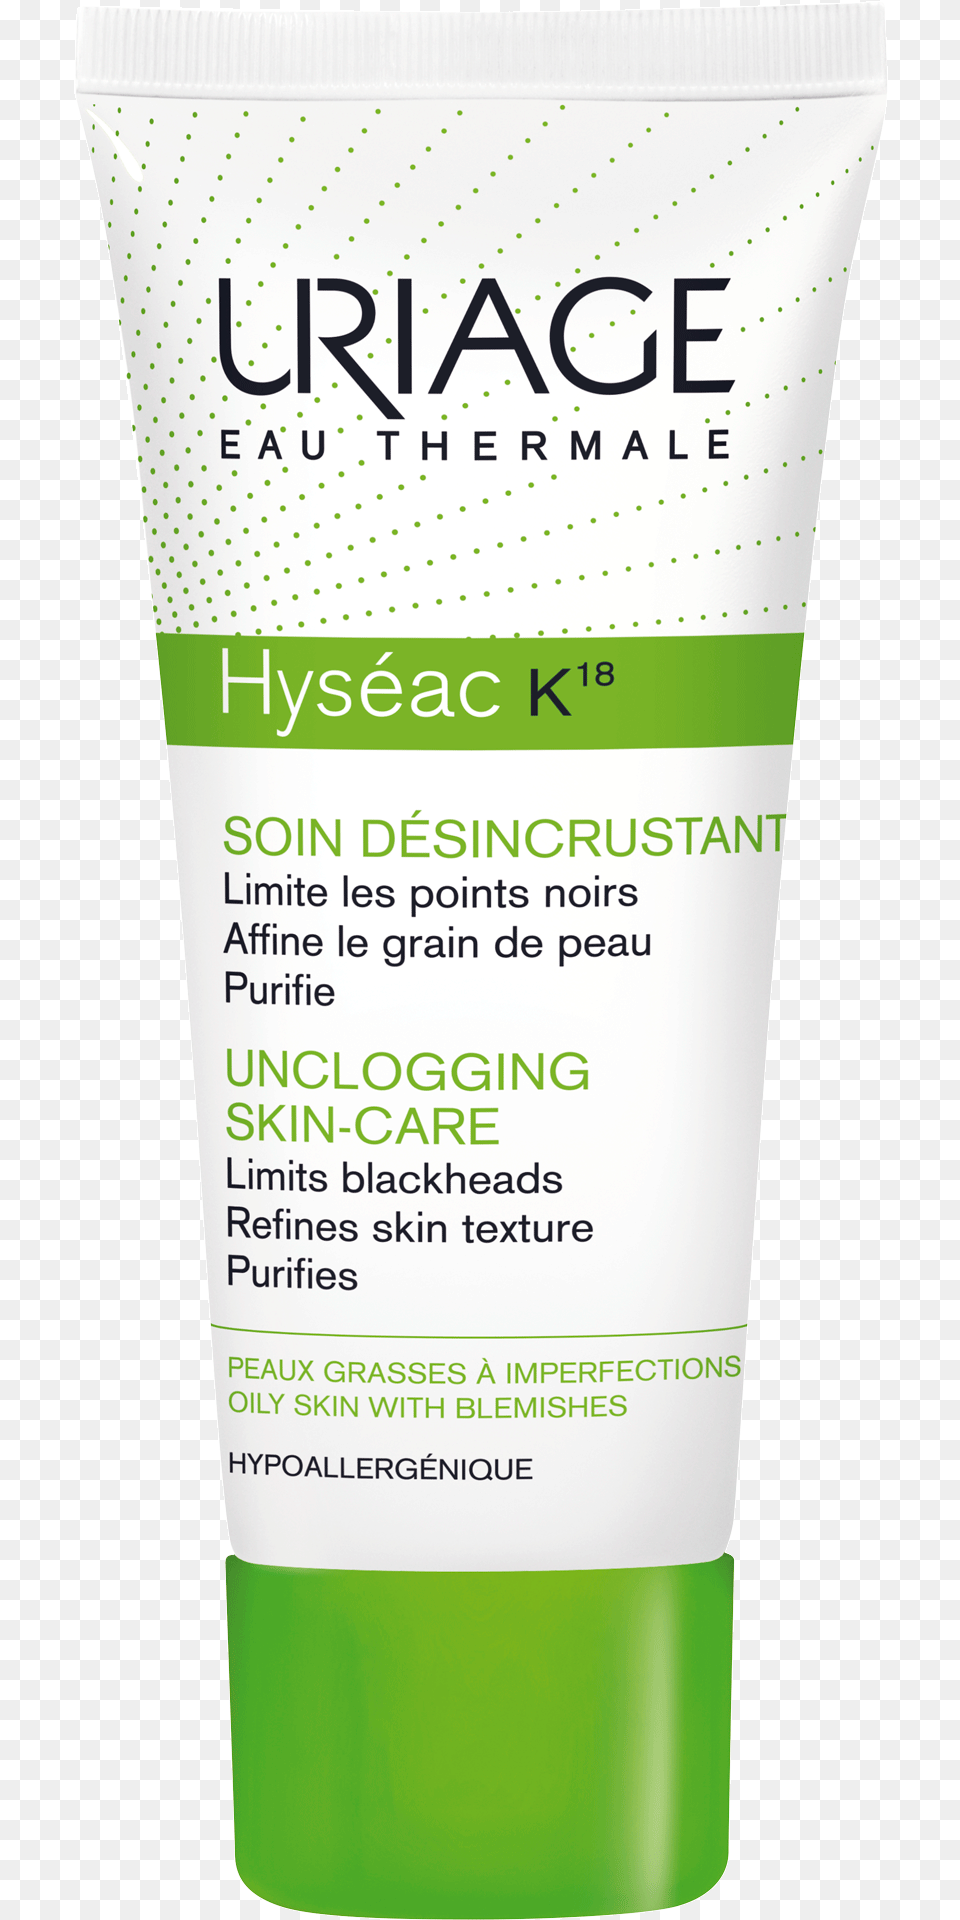 Uriage Hyseac K18 Deep Pore Cleansing Care Cosmetics Cream, Bottle, Lotion, Sunscreen, Tape Png Image